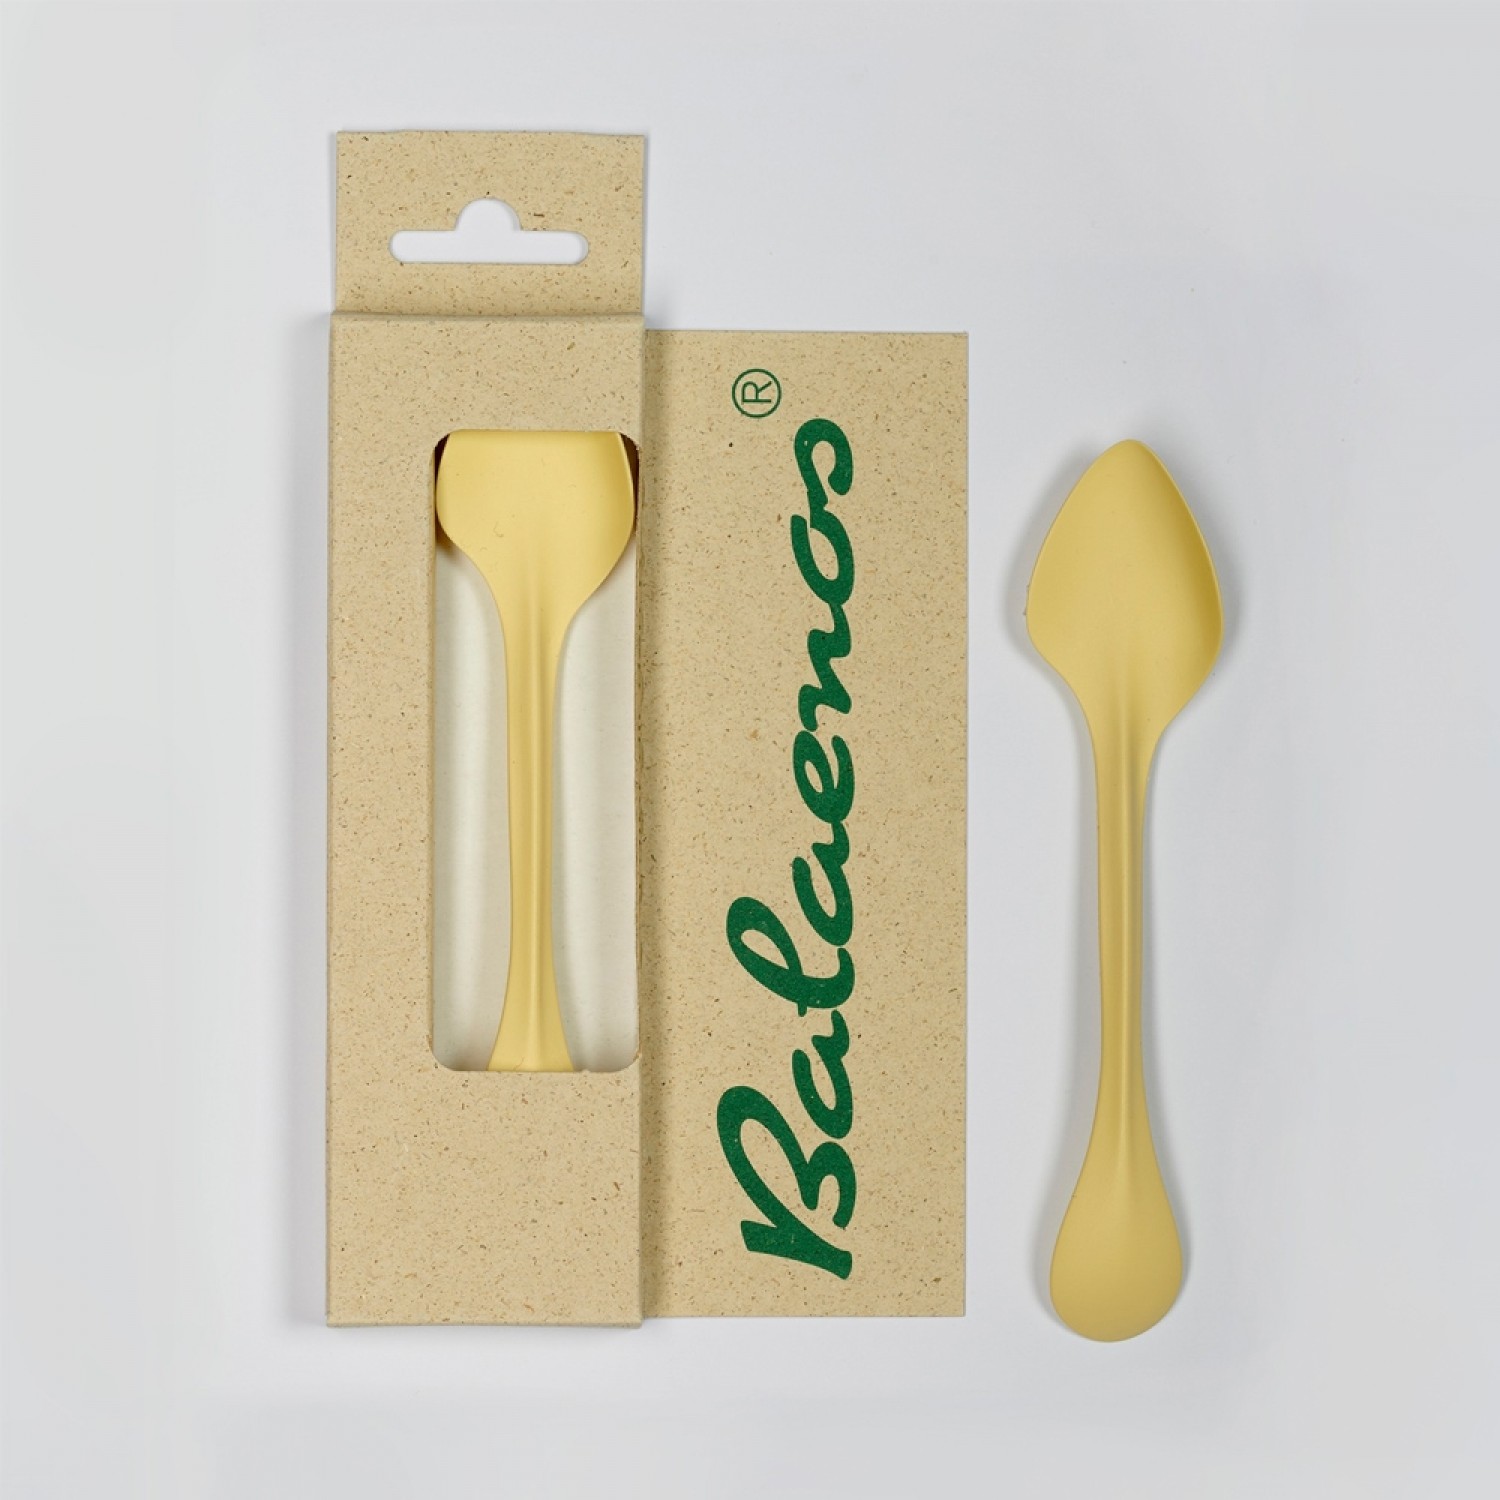 Balaenos Spoon for Leftovers, green product design